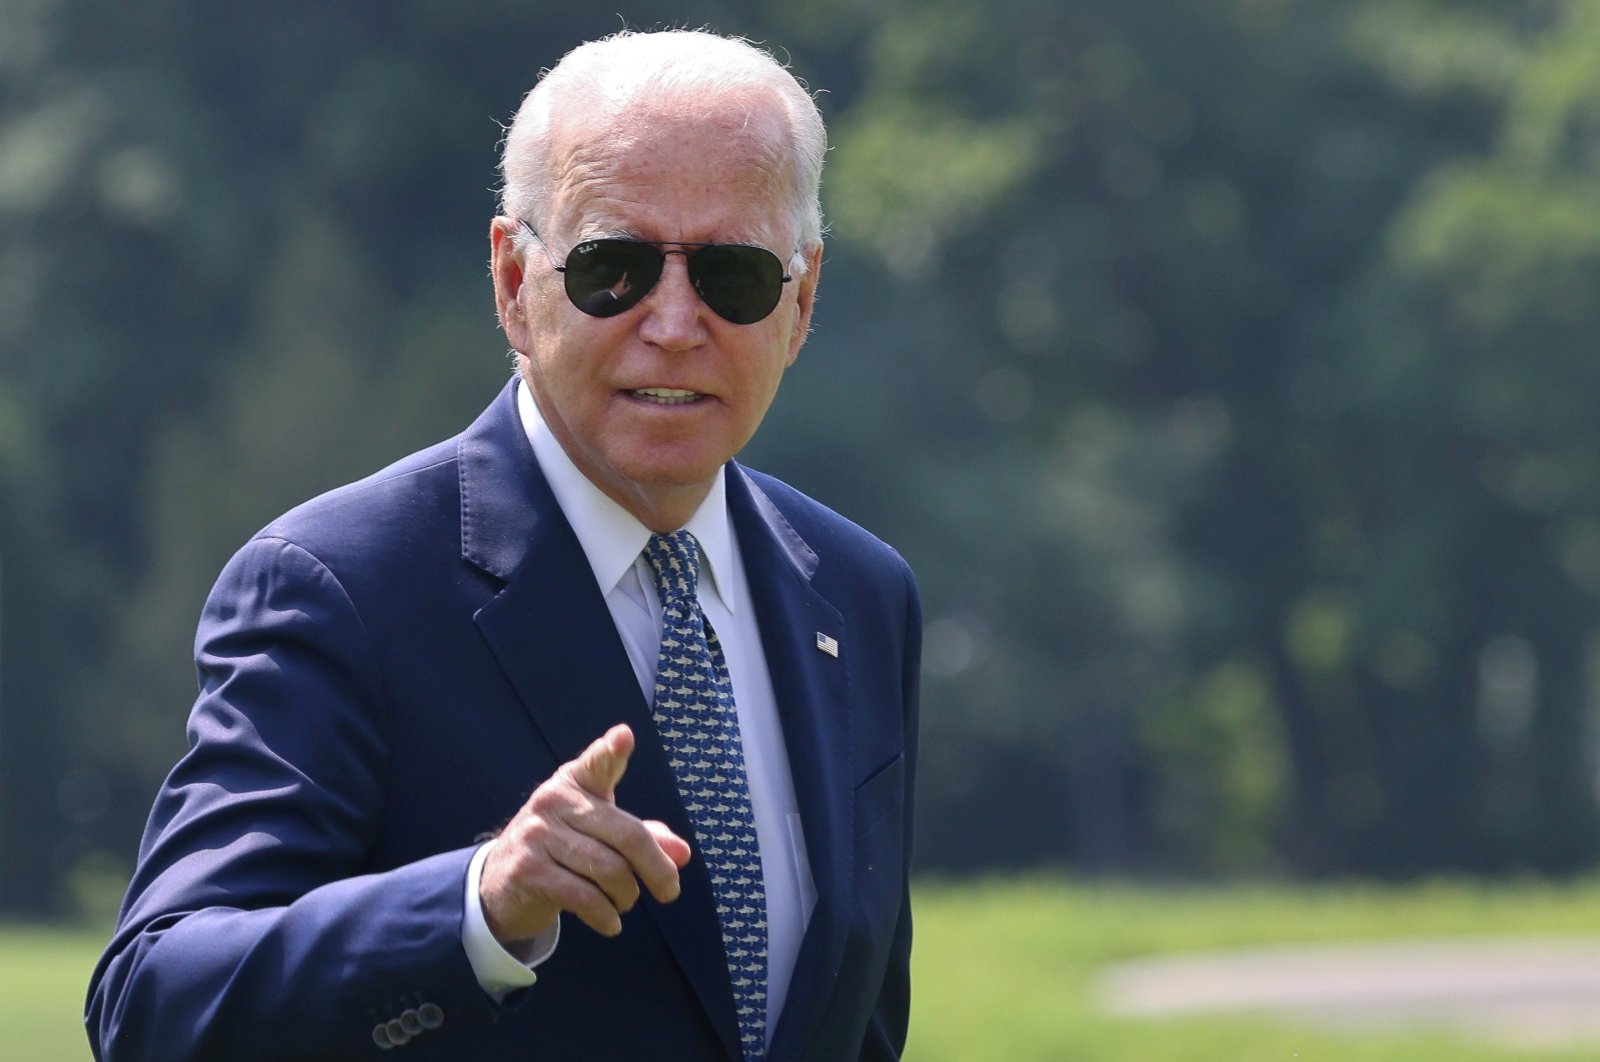 U.S. President Joe Biden gestures toward members of the media as he arrives at the White House following a stay in Delaware, in Washington, U.S., Aug. 10, 2021. (Reuters Photo)